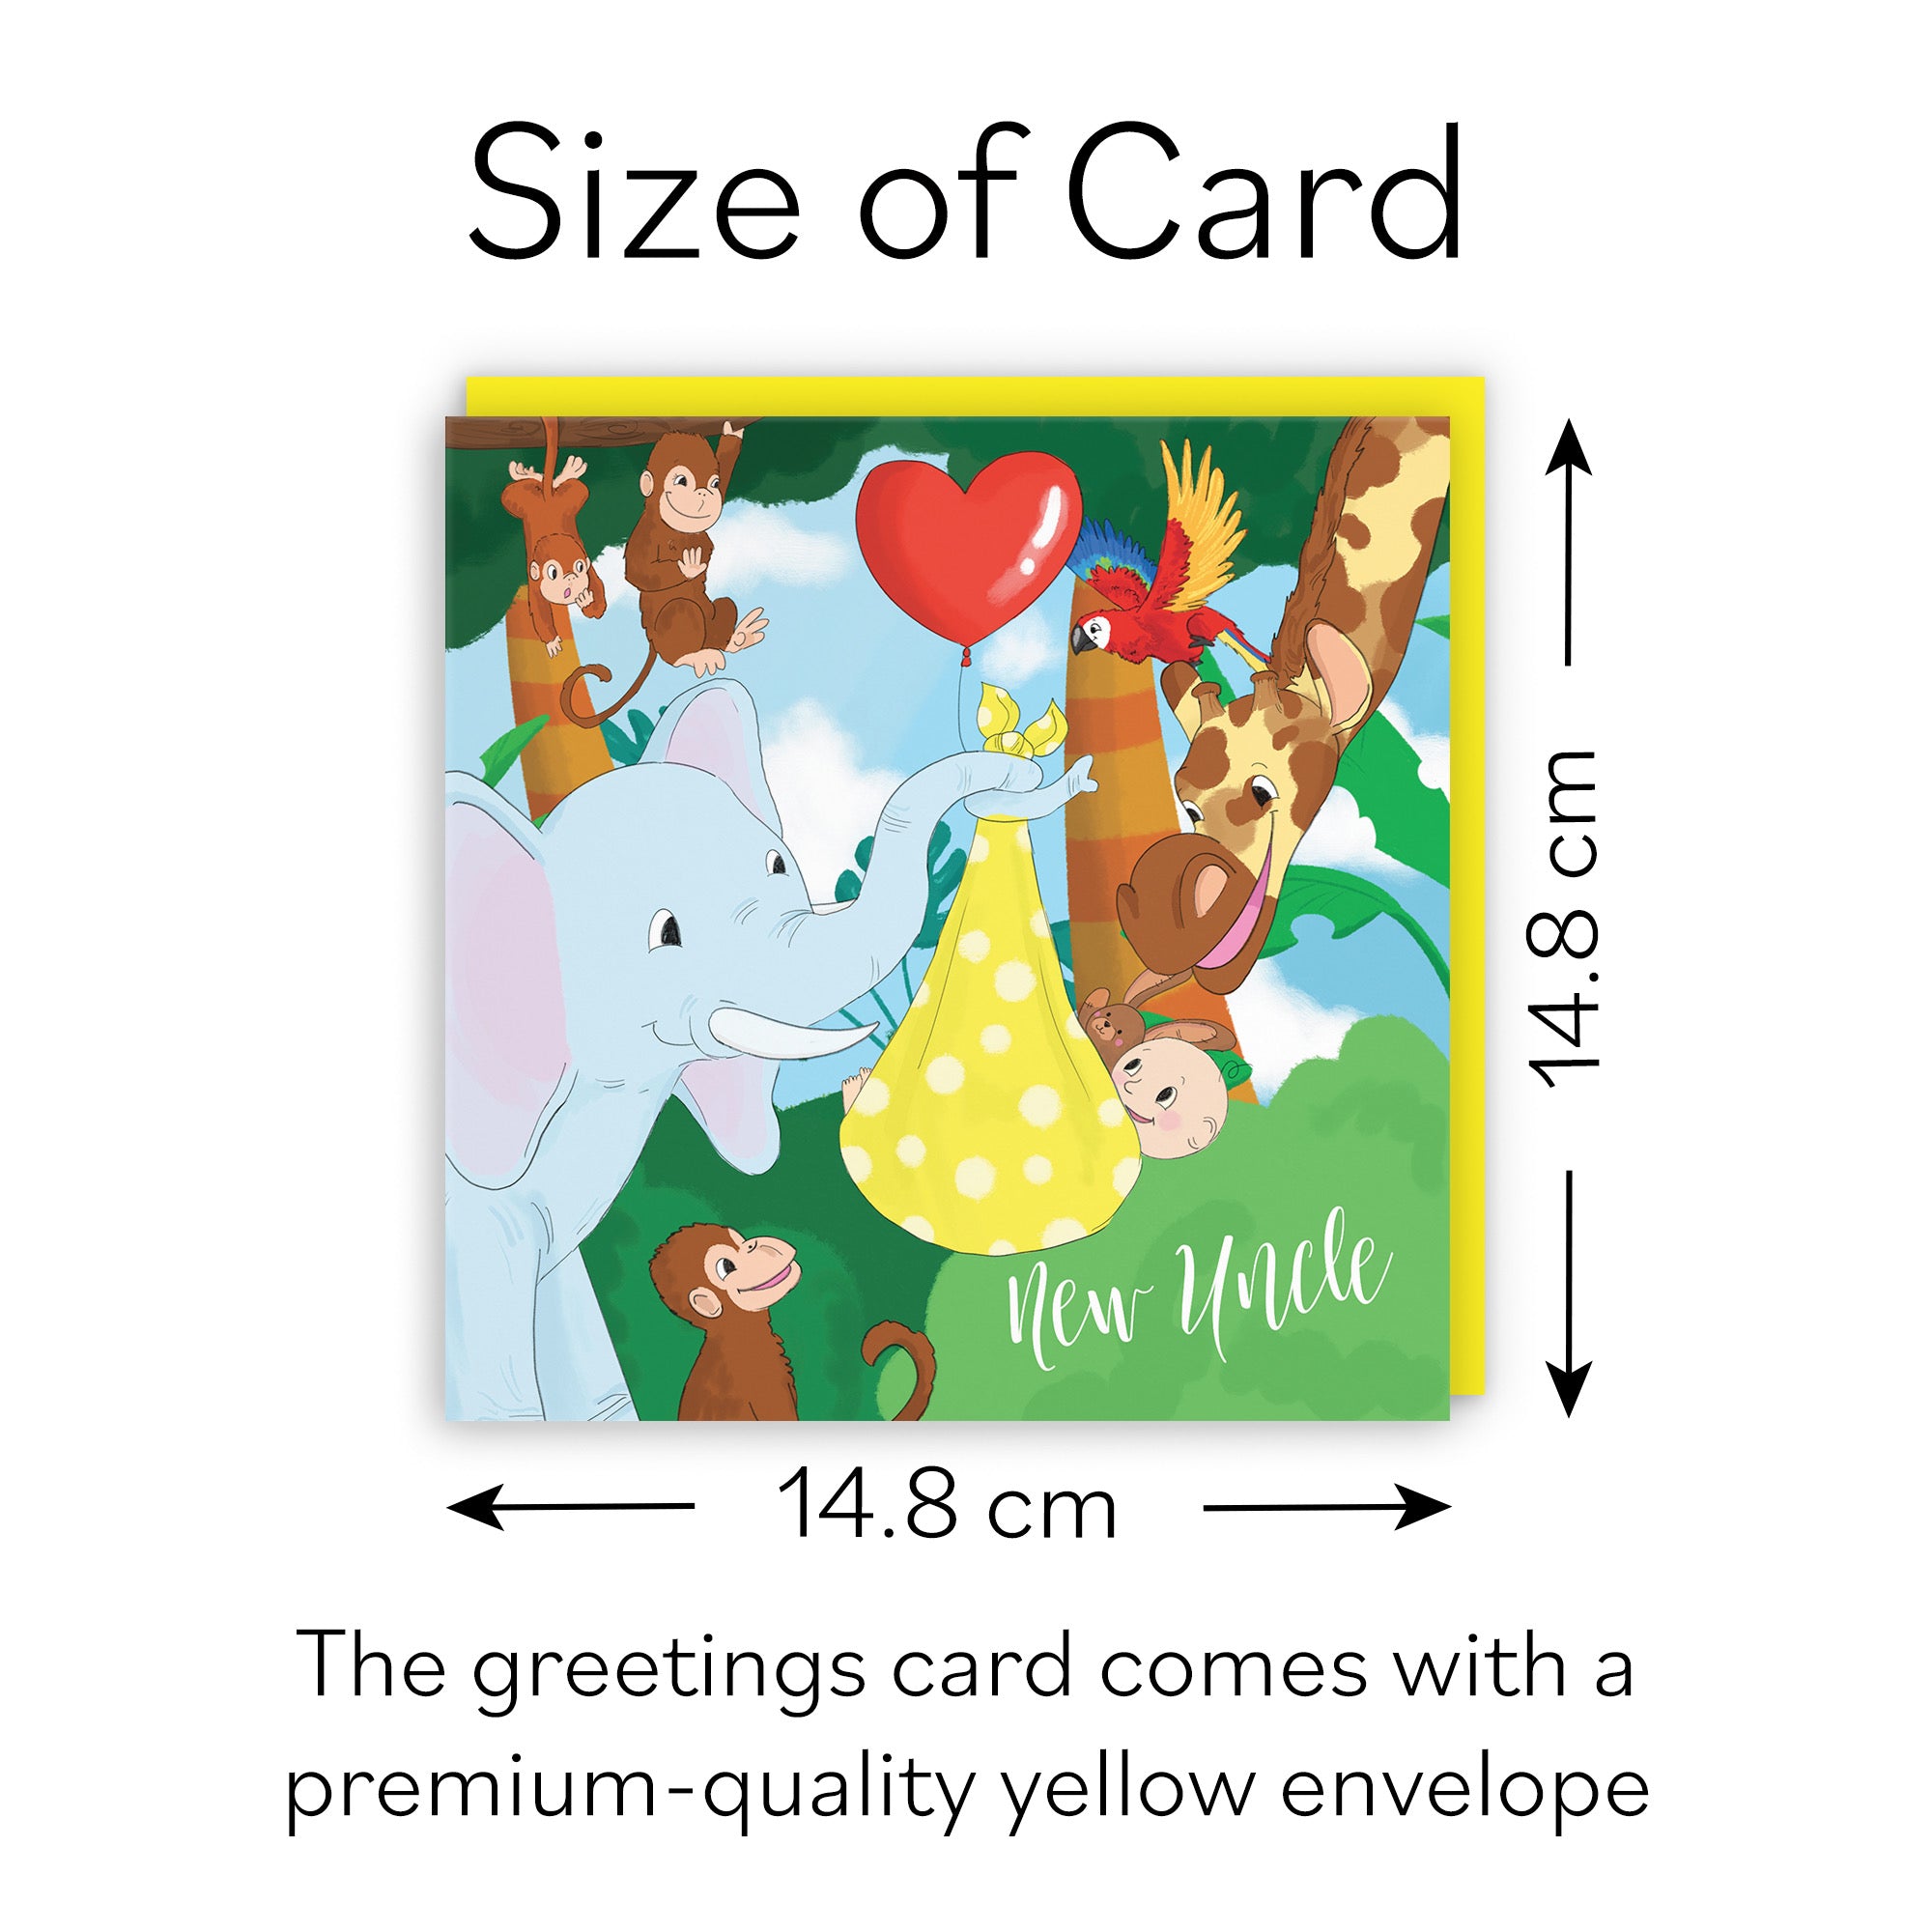 New Uncle Congratulations New Baby Card Cute Elephant Jungle - Default Title (B09VMHJ2GB)